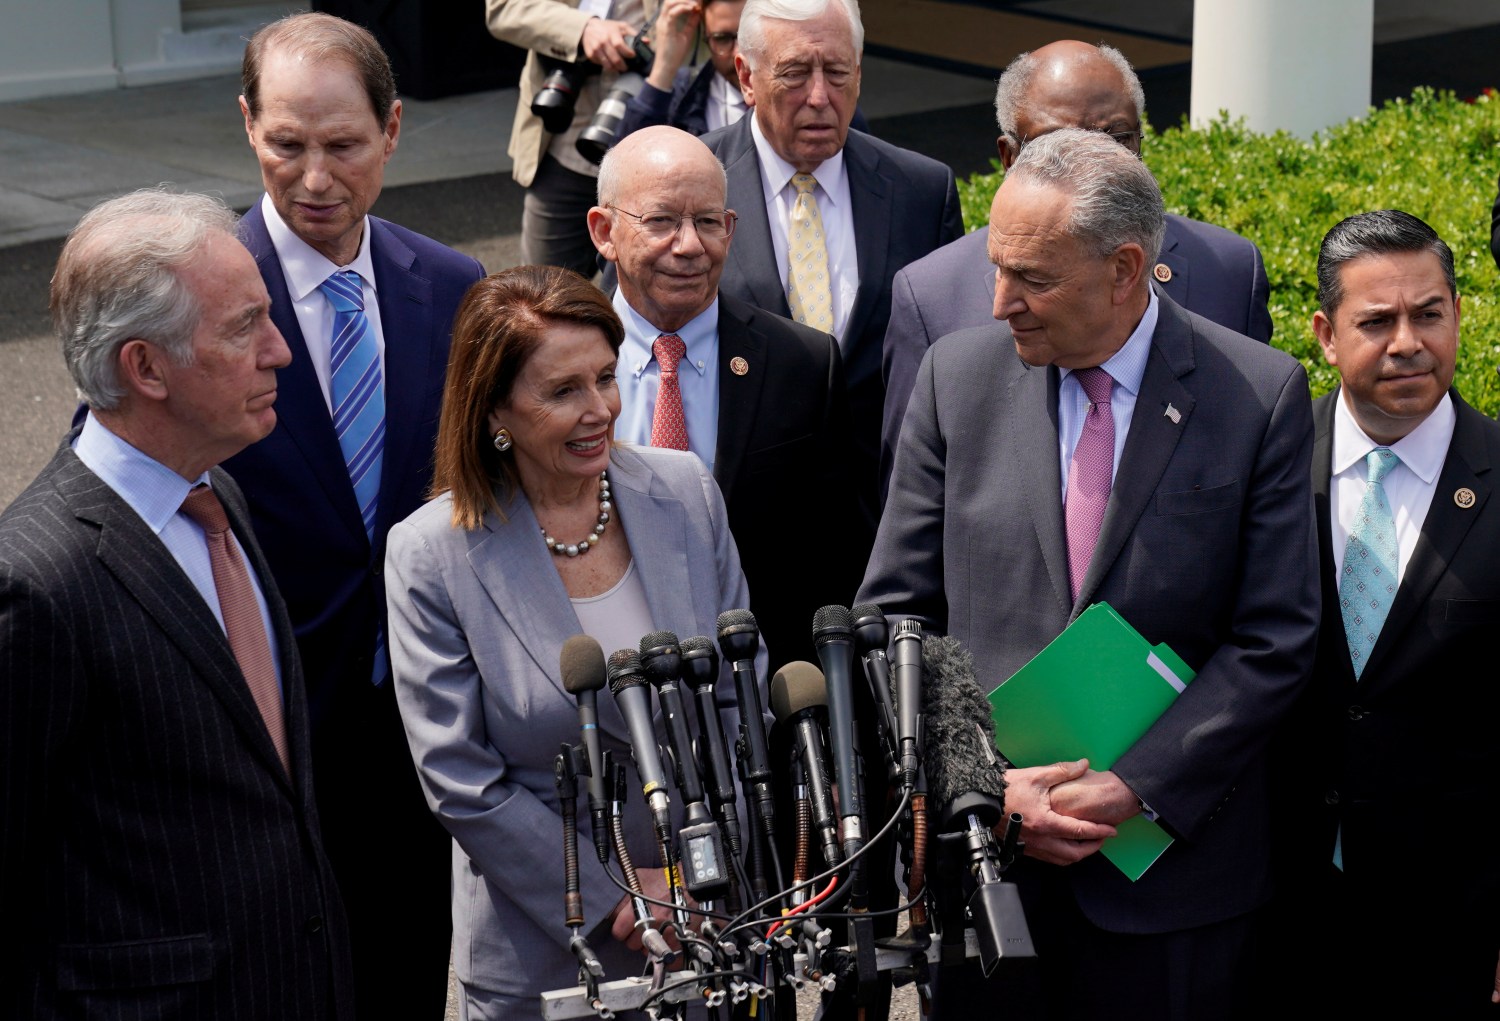 Senate Democratic Leader Chuck Schumer, U.S. House Speaker Nancy Pelosi and other congressional Democrats speak to reporters after their meeting on infrastructure with U.S. President Donald Trump at the White House in Washington, U.S., April 29, 2019.  REUTERS/Kevin Lamarque - RC134195ACF0